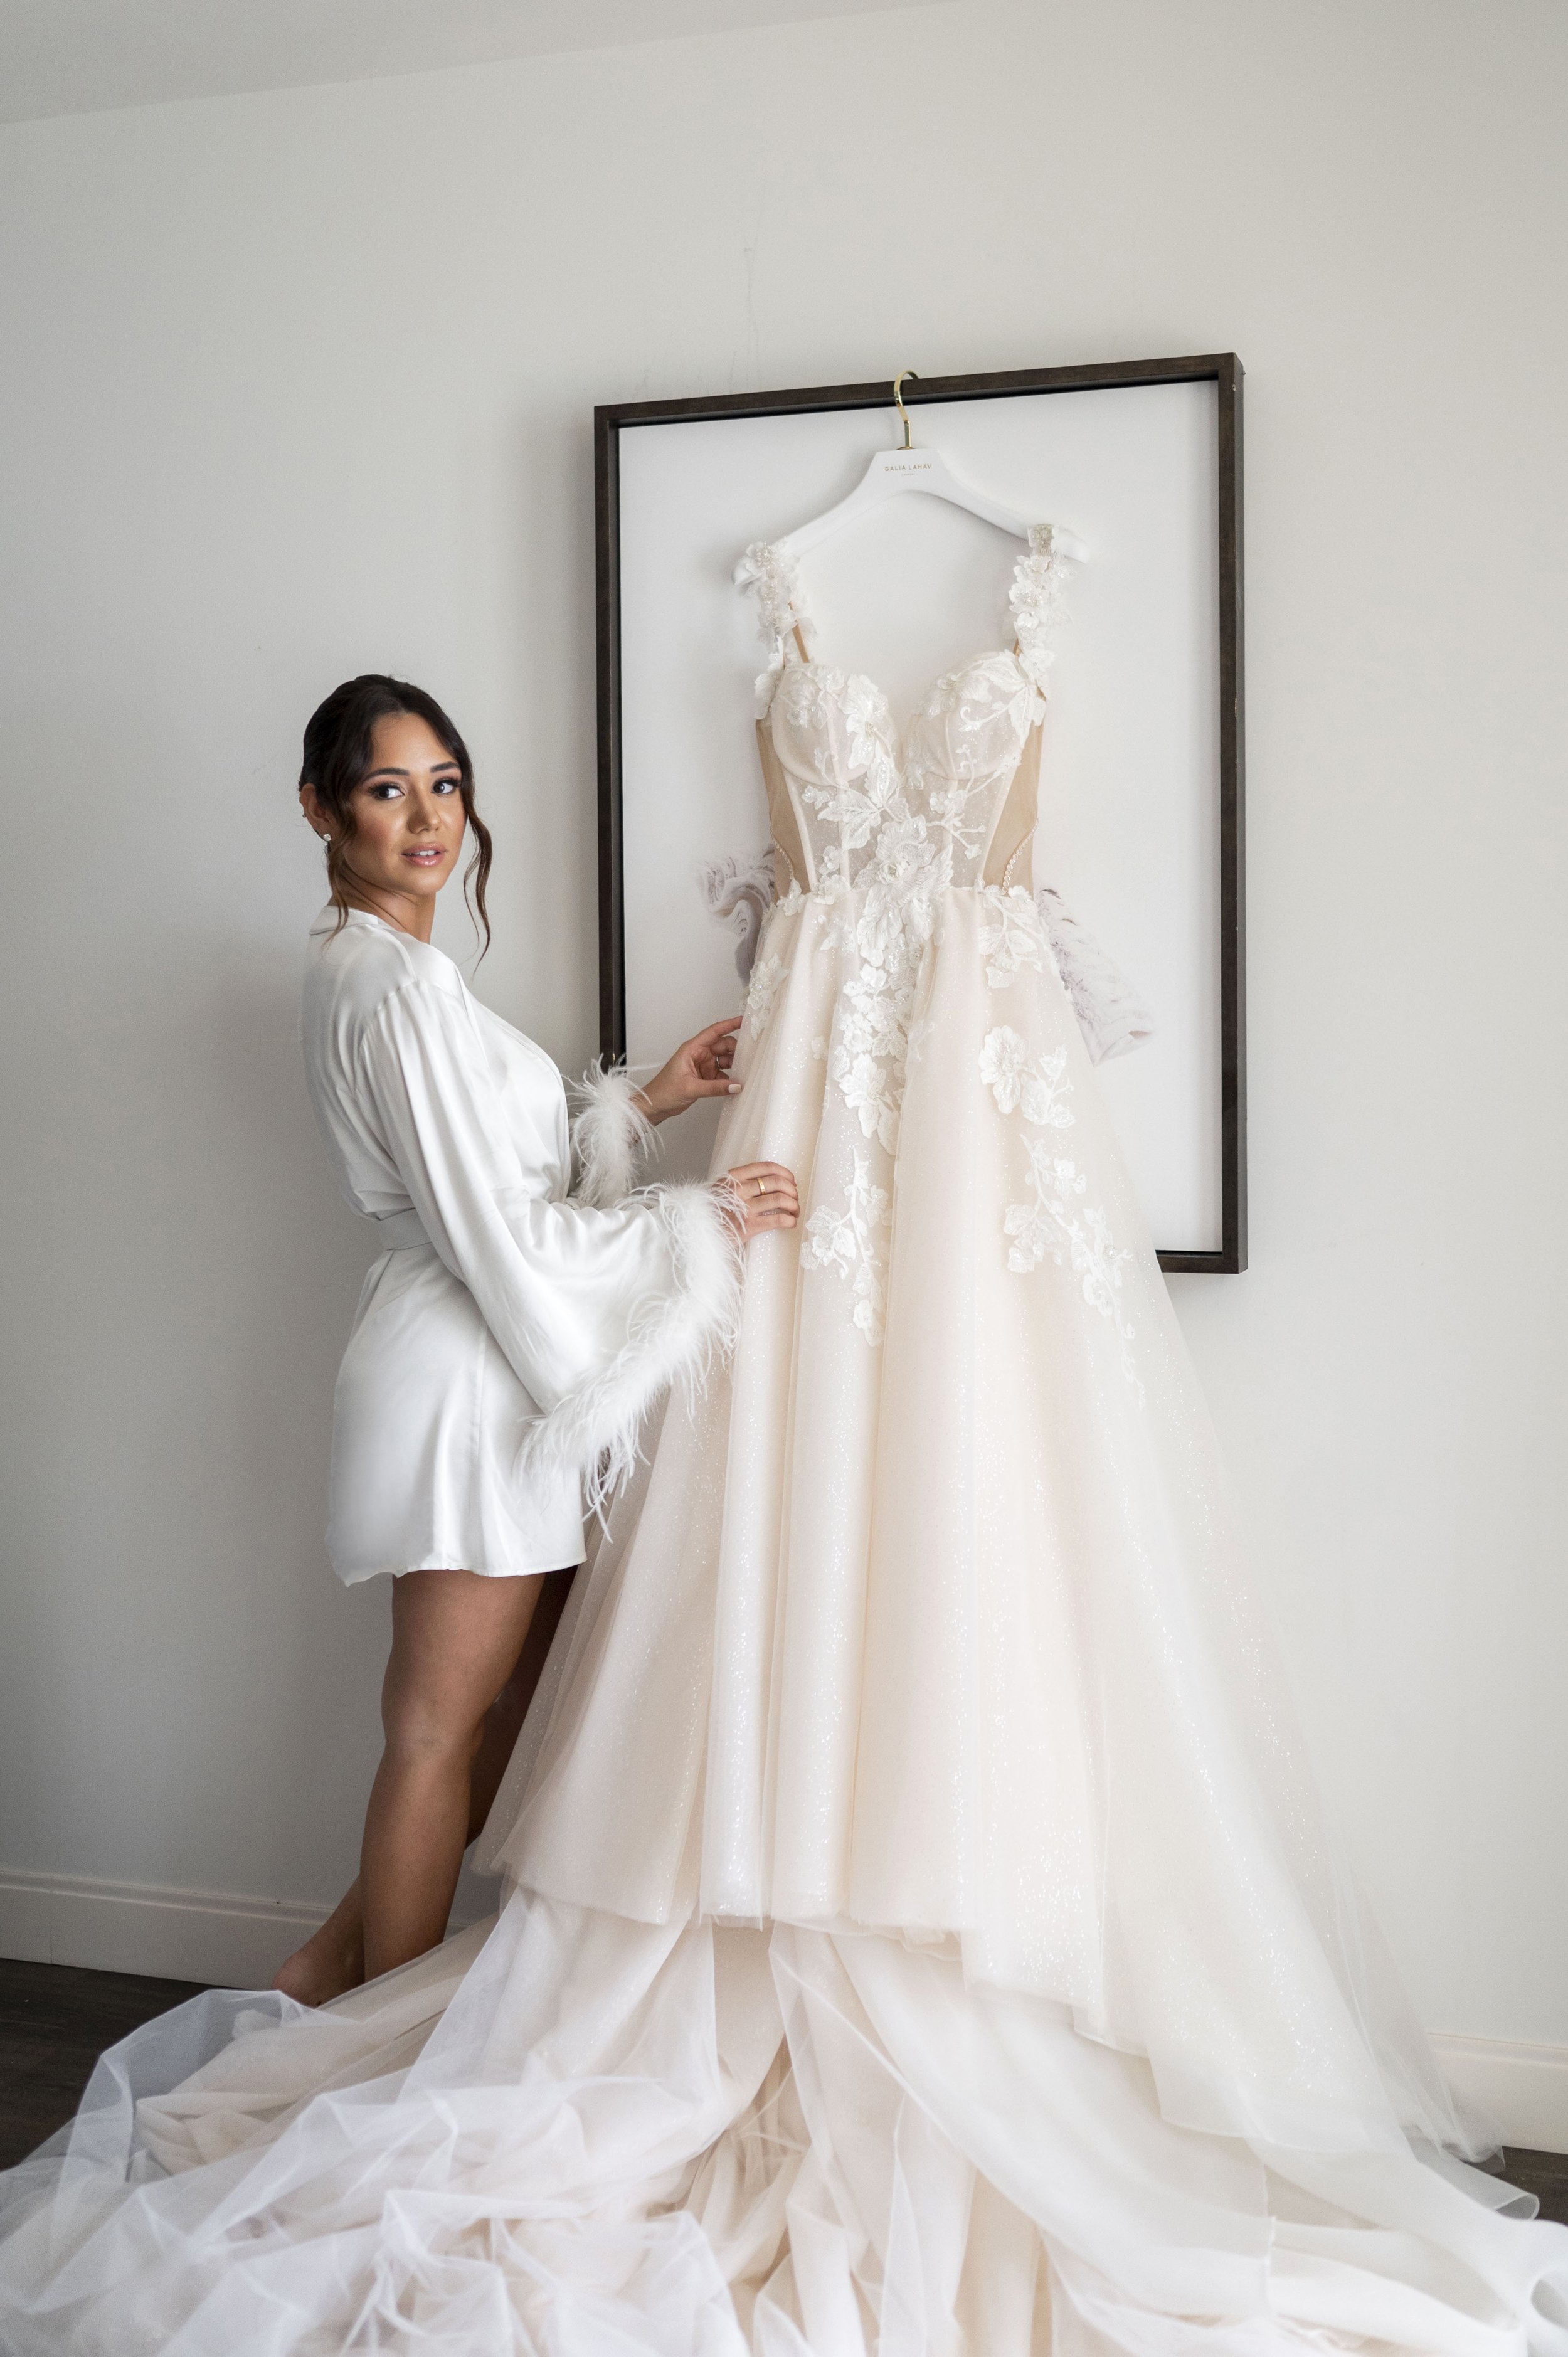 bride posing  next to her gown hanged on the wall